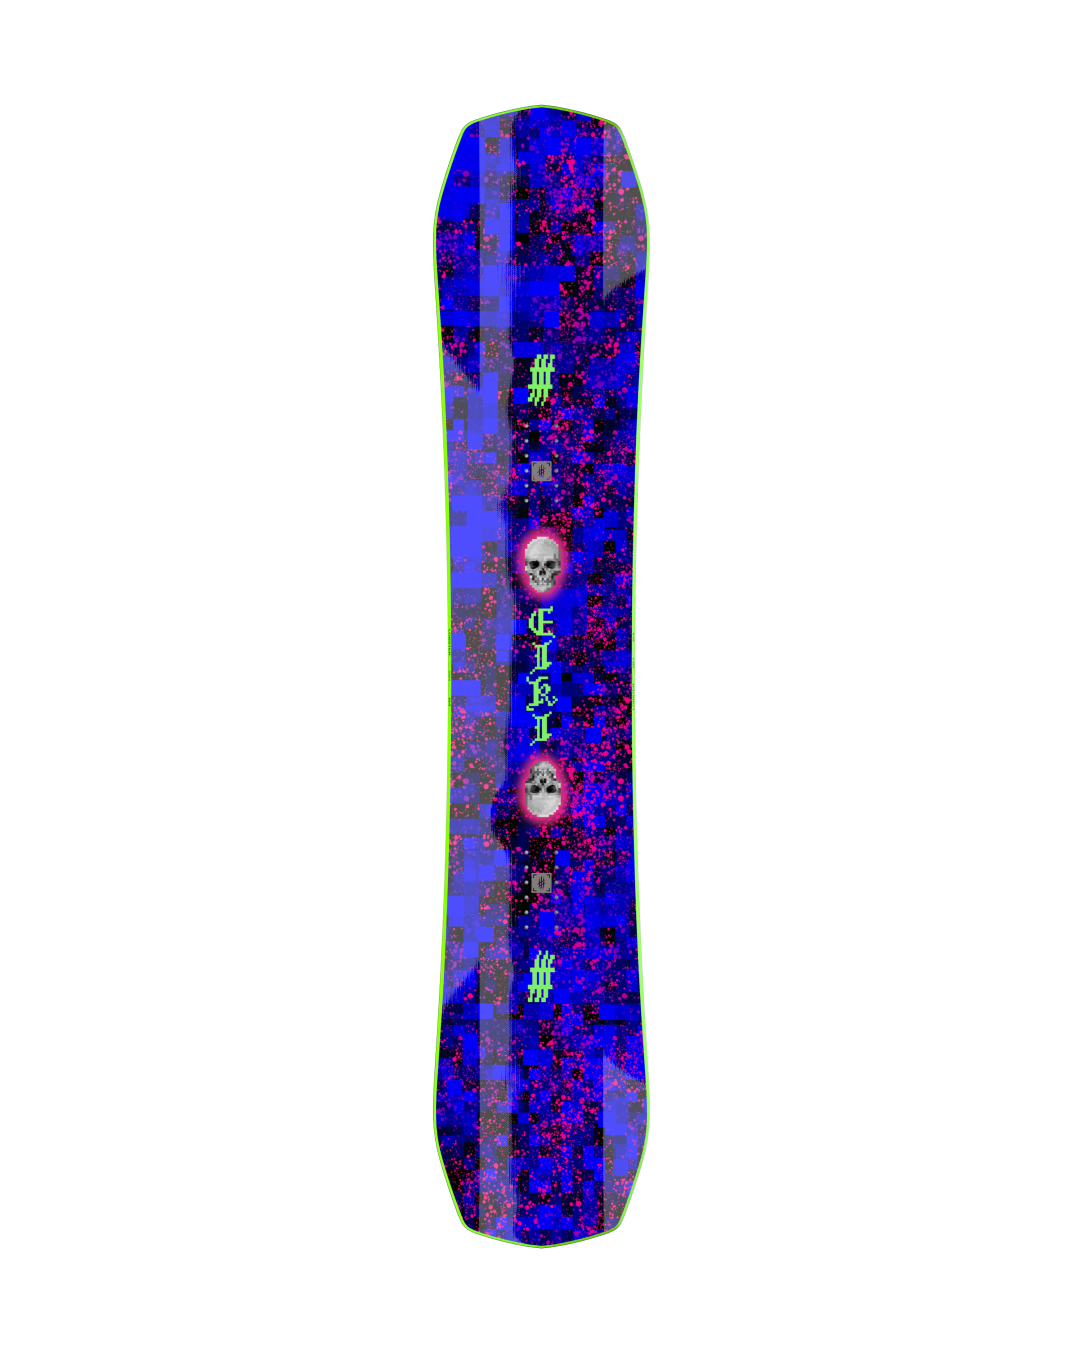 Eiki Pro lobstersnowboards 2023-2024 snowboarding product image